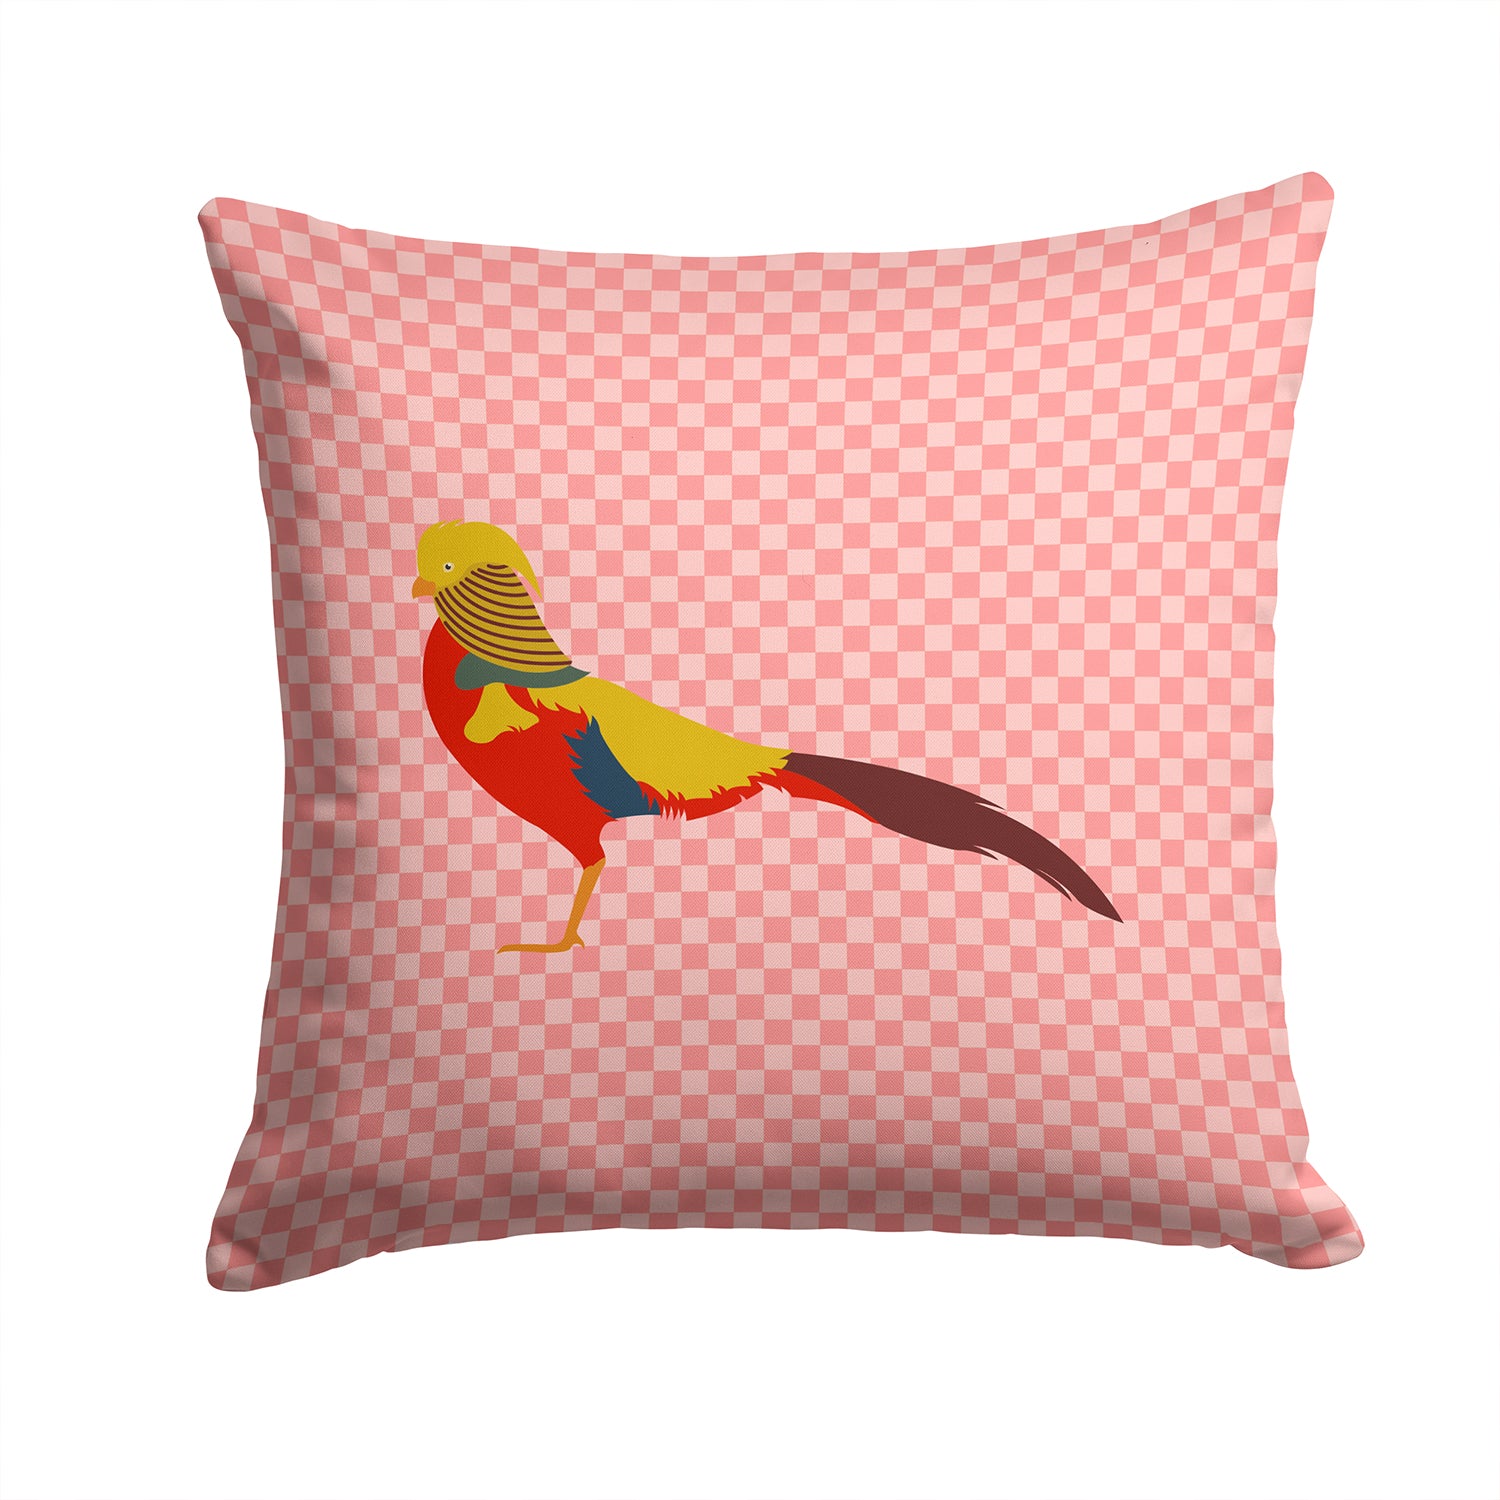 Golden or Chinese Pheasant Pink Check Fabric Decorative Pillow BB7928PW1414 - the-store.com